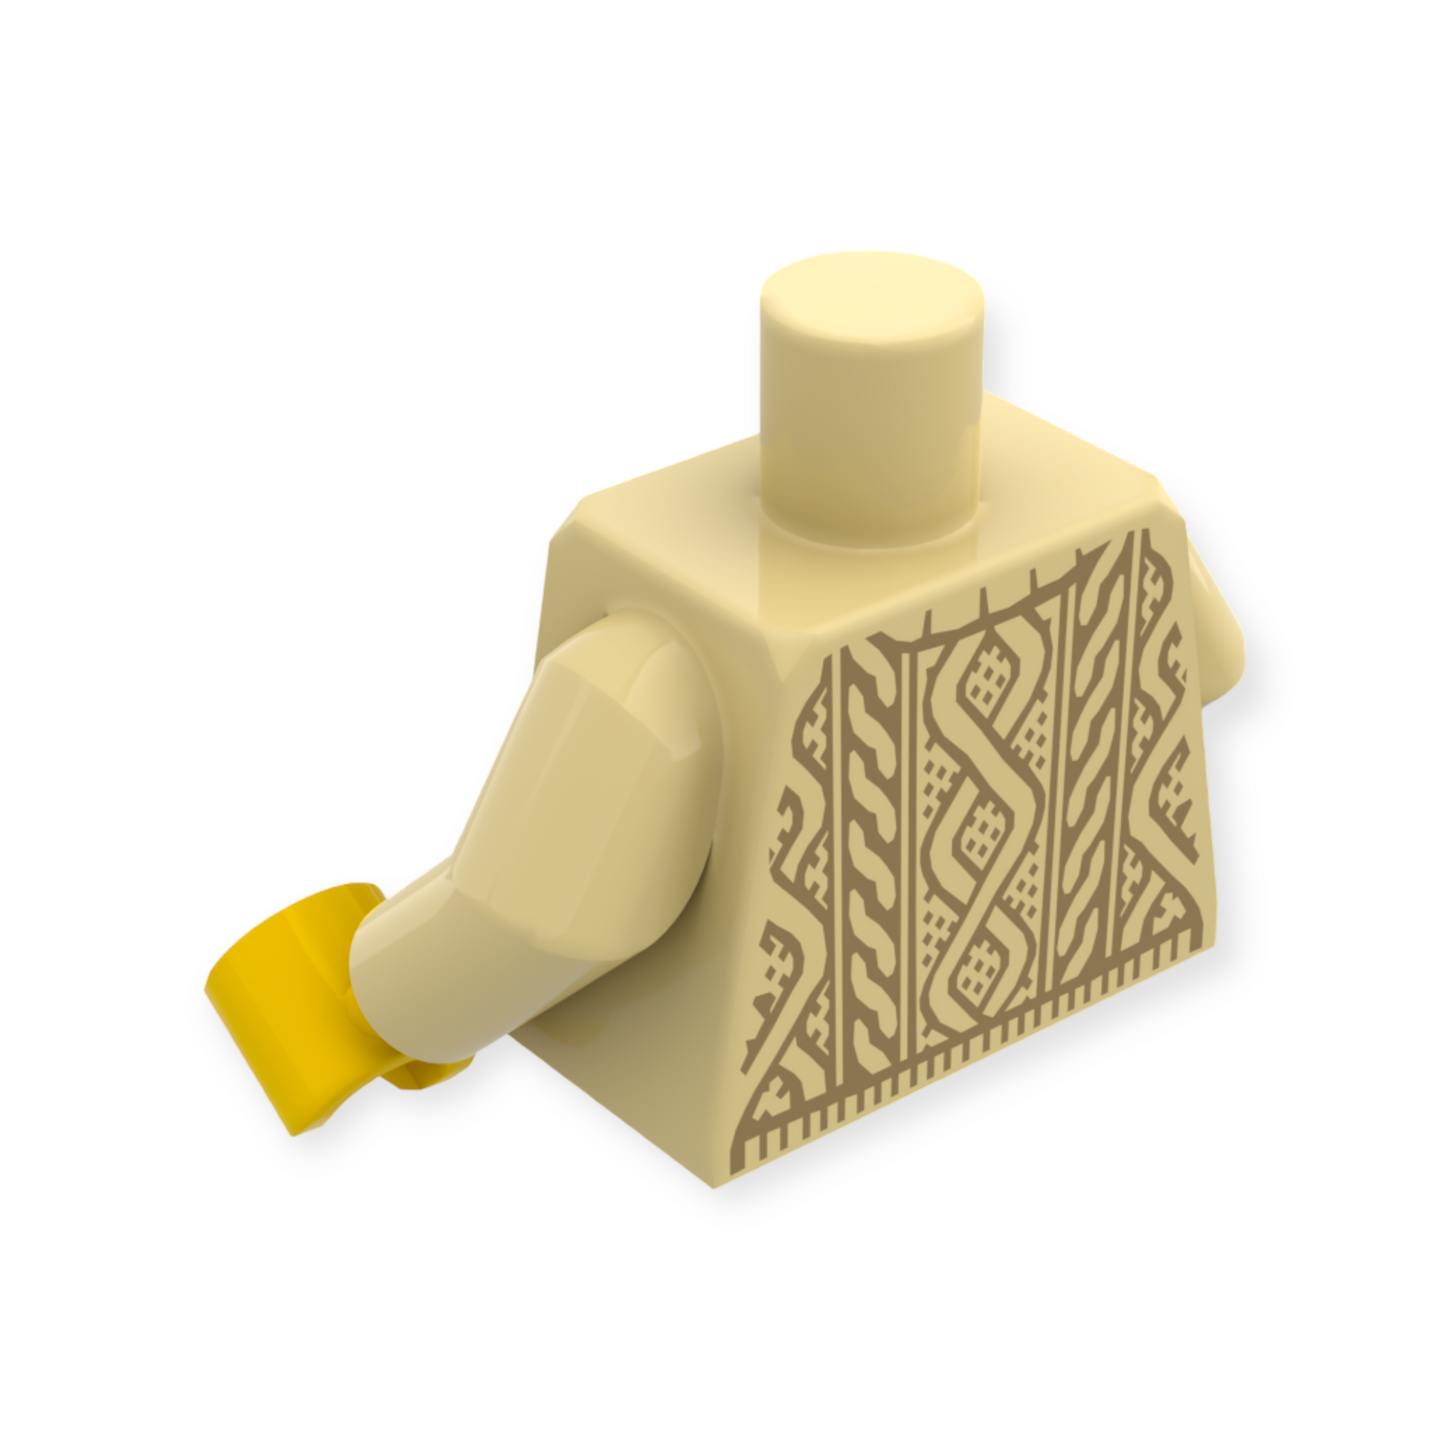 LEGO Torso - 4023 Knit Cable Sweater